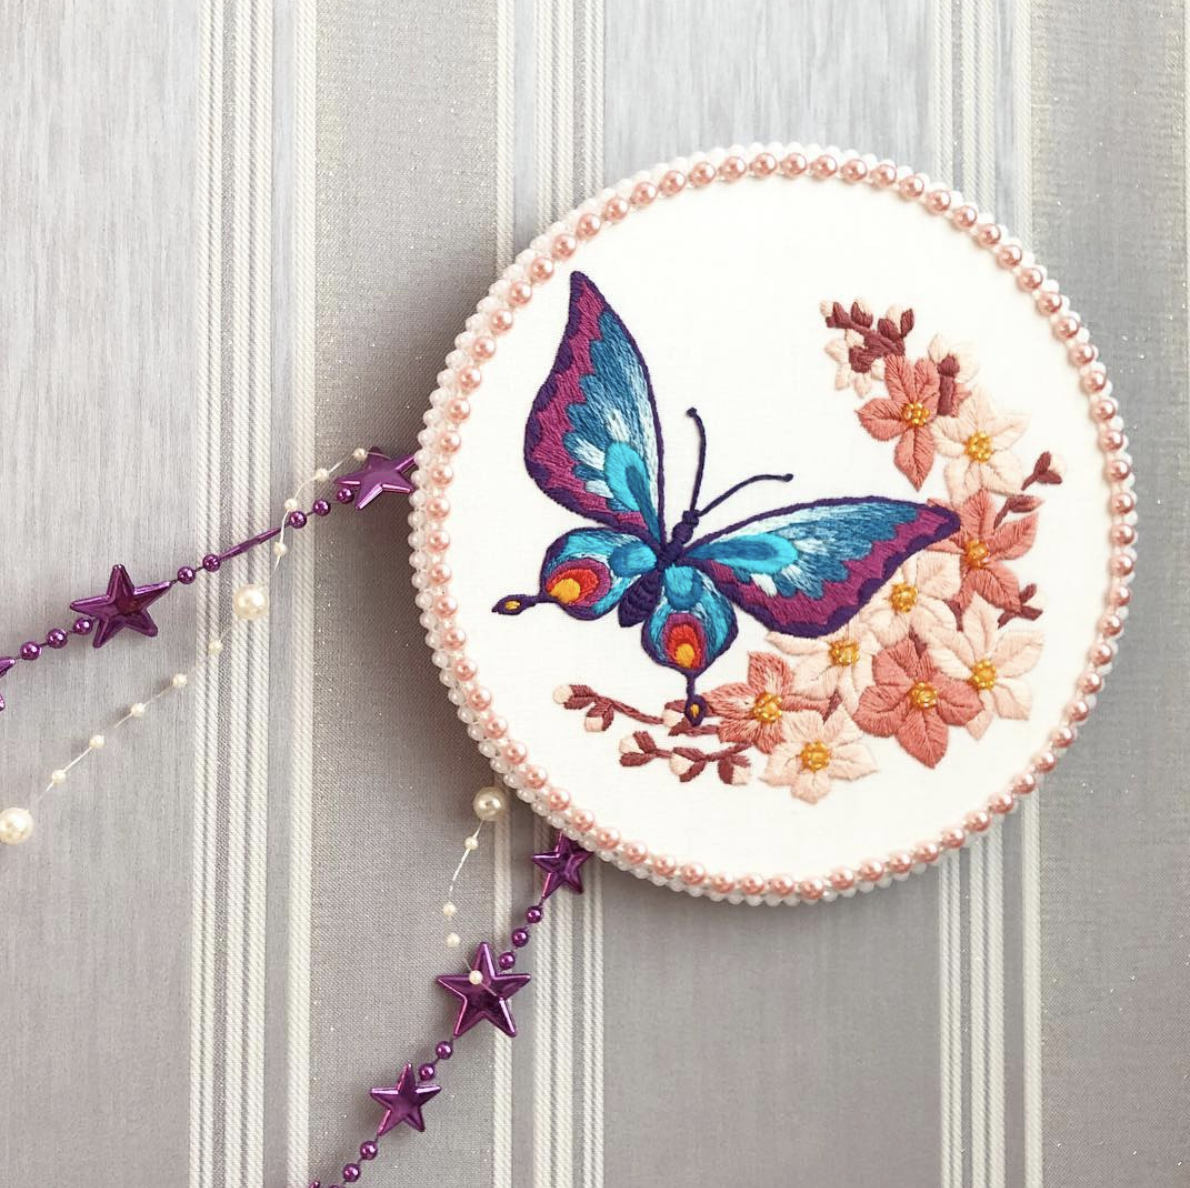 Butterfly and Sakura Hand Embroidery Pattern | Digital Download